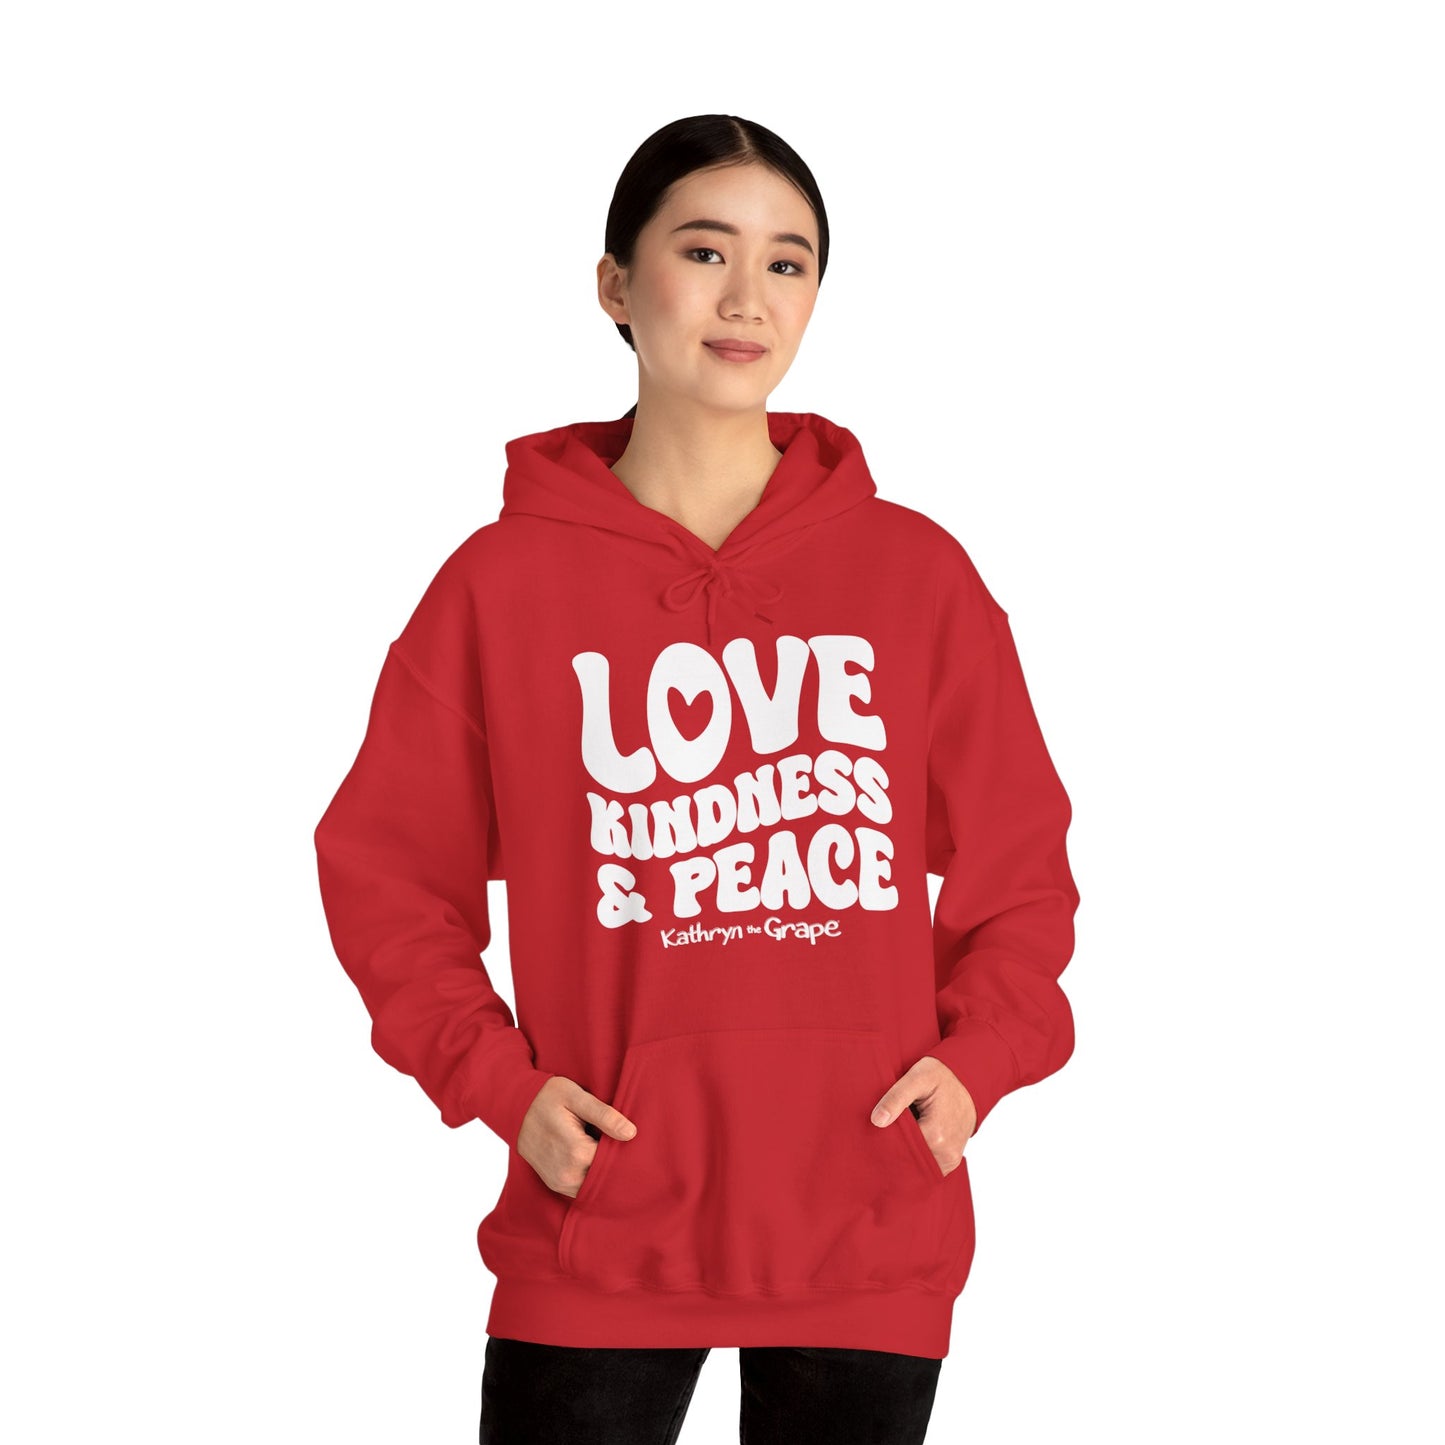 Kathryn the Grape Love, Kindness, and Peace Teen/Adult Unisex Heavy Blend™ Hooded Sweatshirt